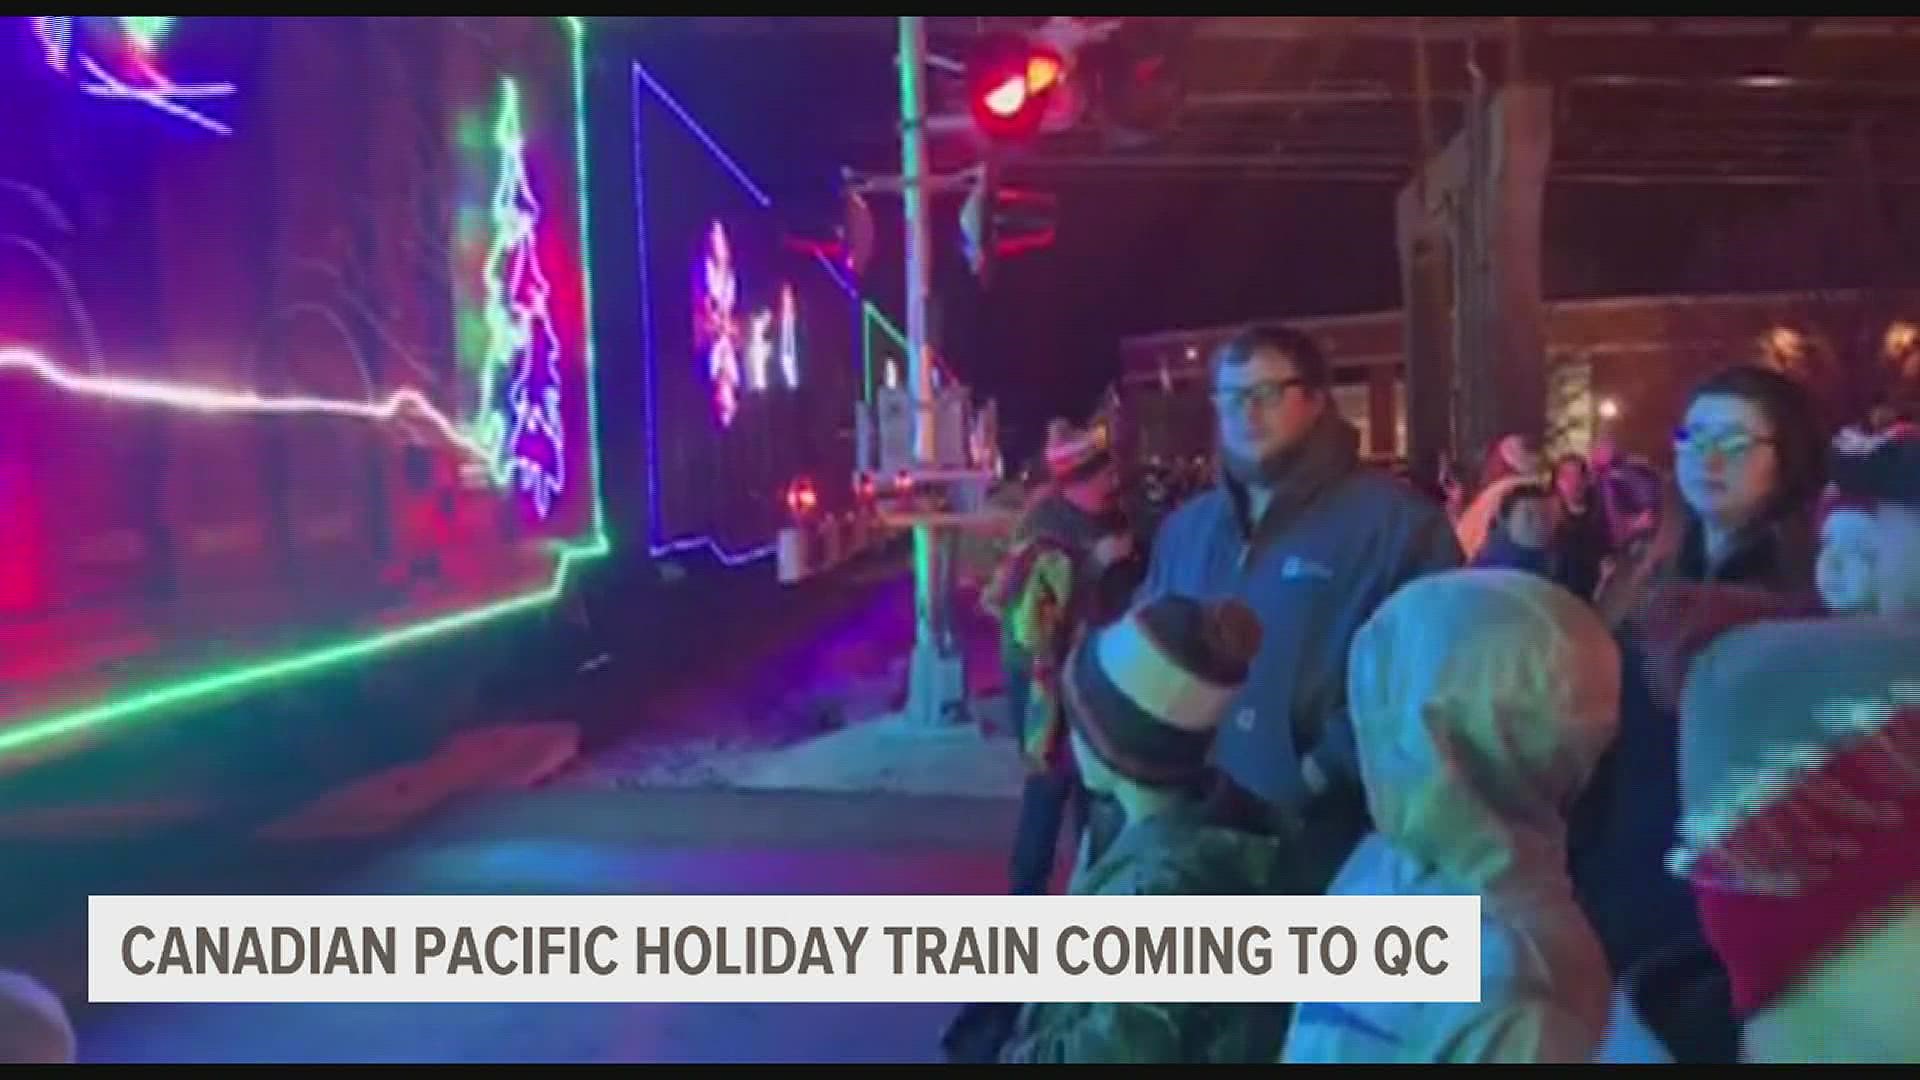 Since the Holiday Train program launched in 1999, it's raised more than $21 million and collected 5 million pounds of food for community food banks.